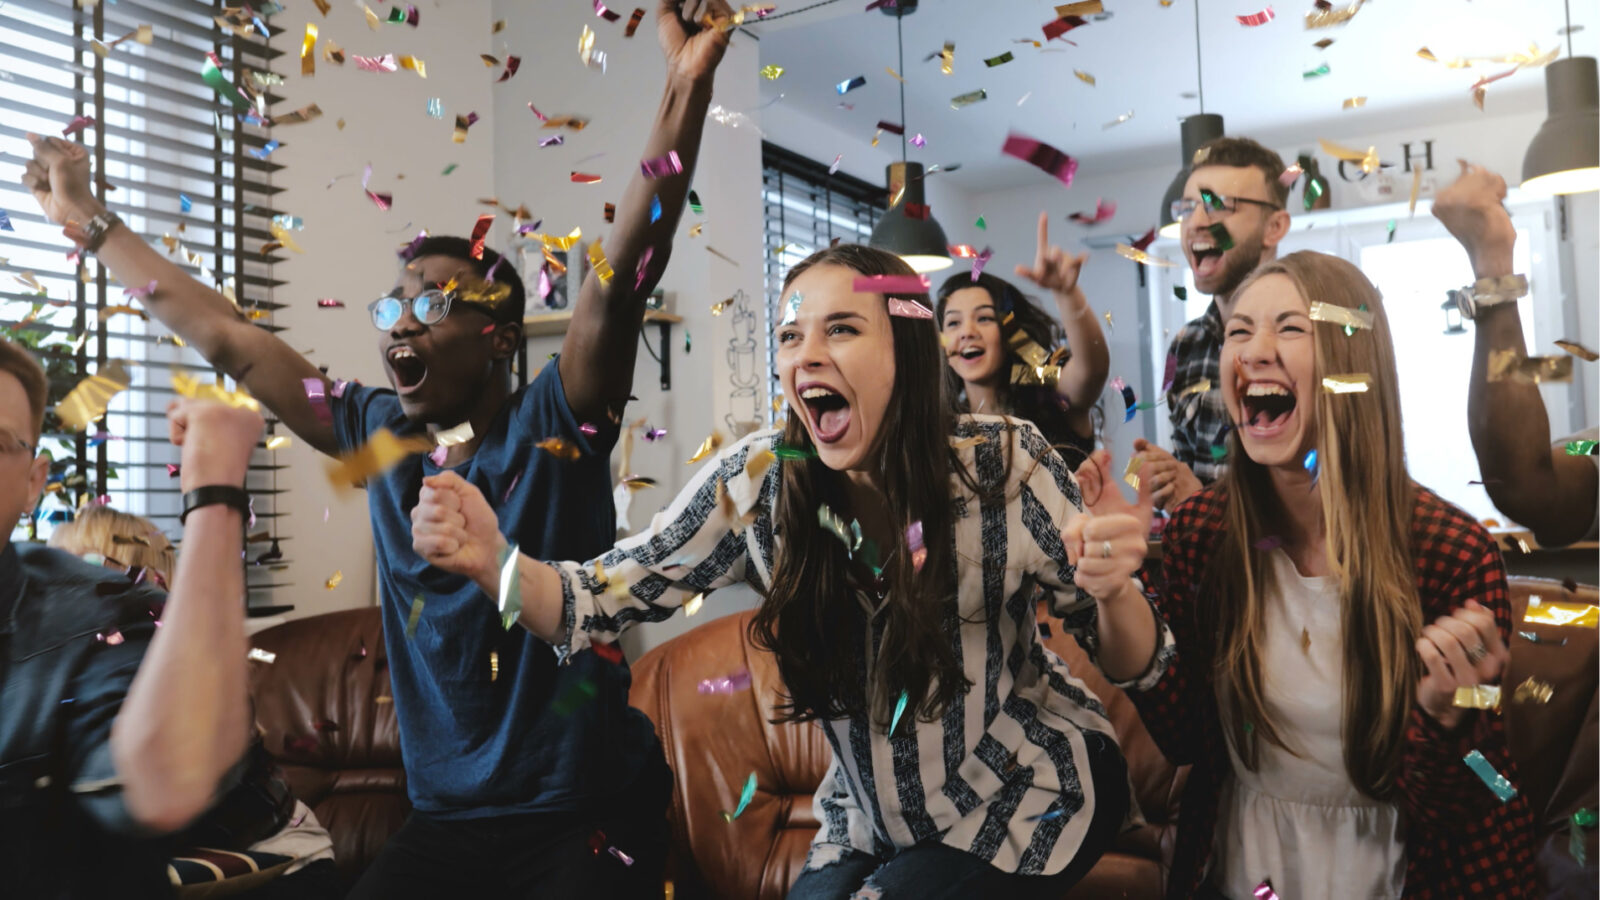 group of people cheering in living room with confetti falling in air